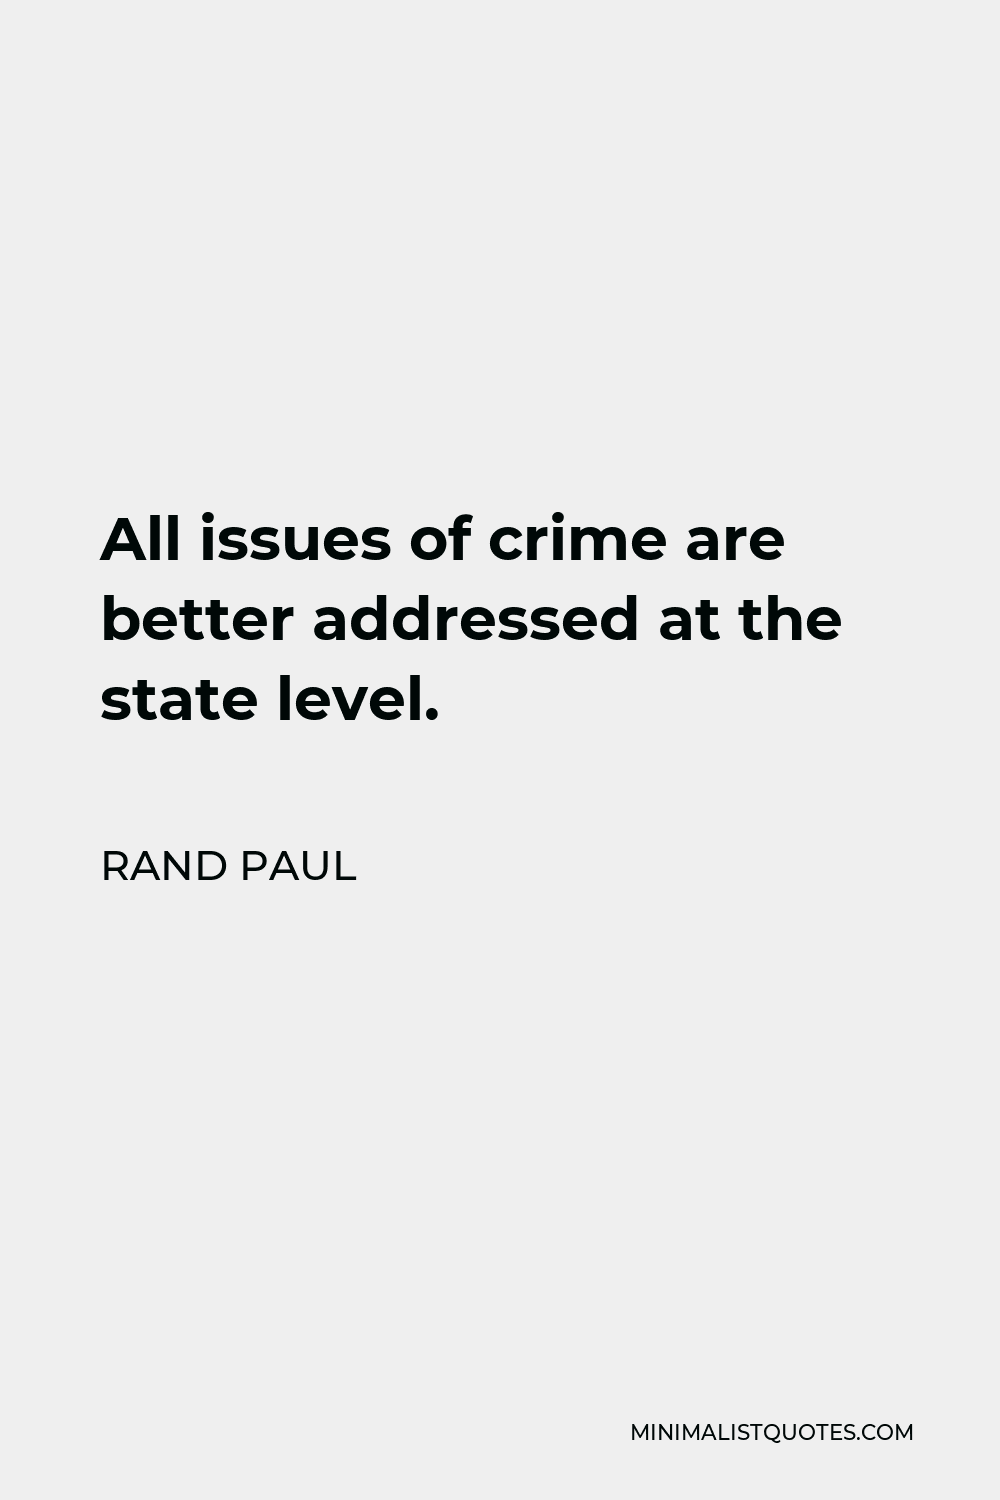 Rand Paul Quote - All issues of crime are better addressed at the state level.